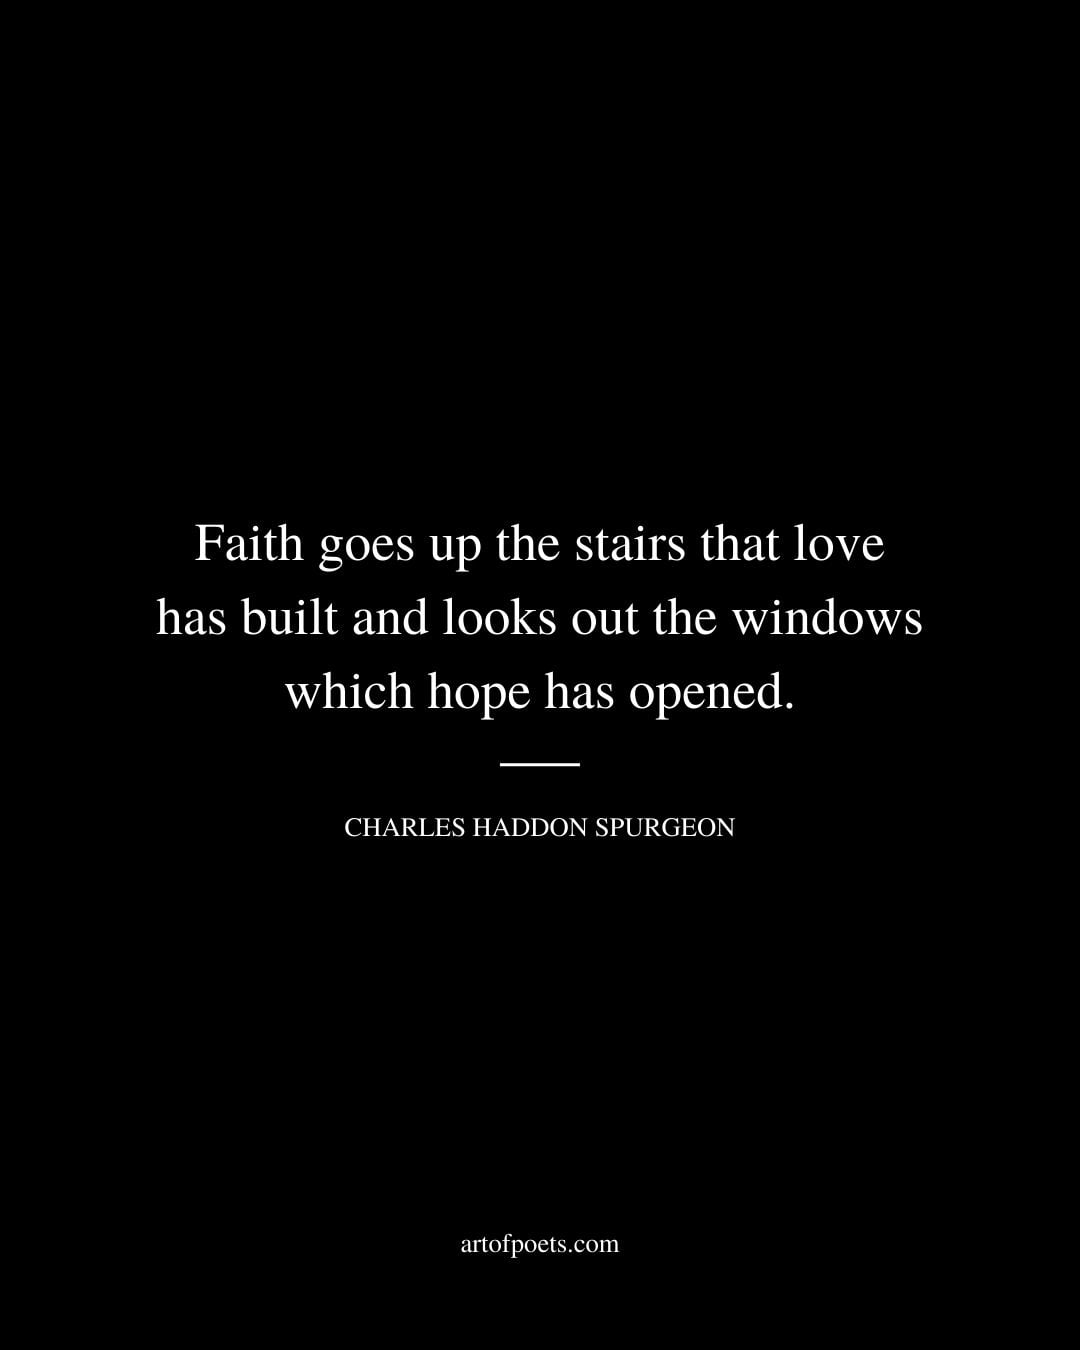 Faith goes up the stairs that love has built and looks out the windows which hope has opened. Charles Haddon Spurgeon